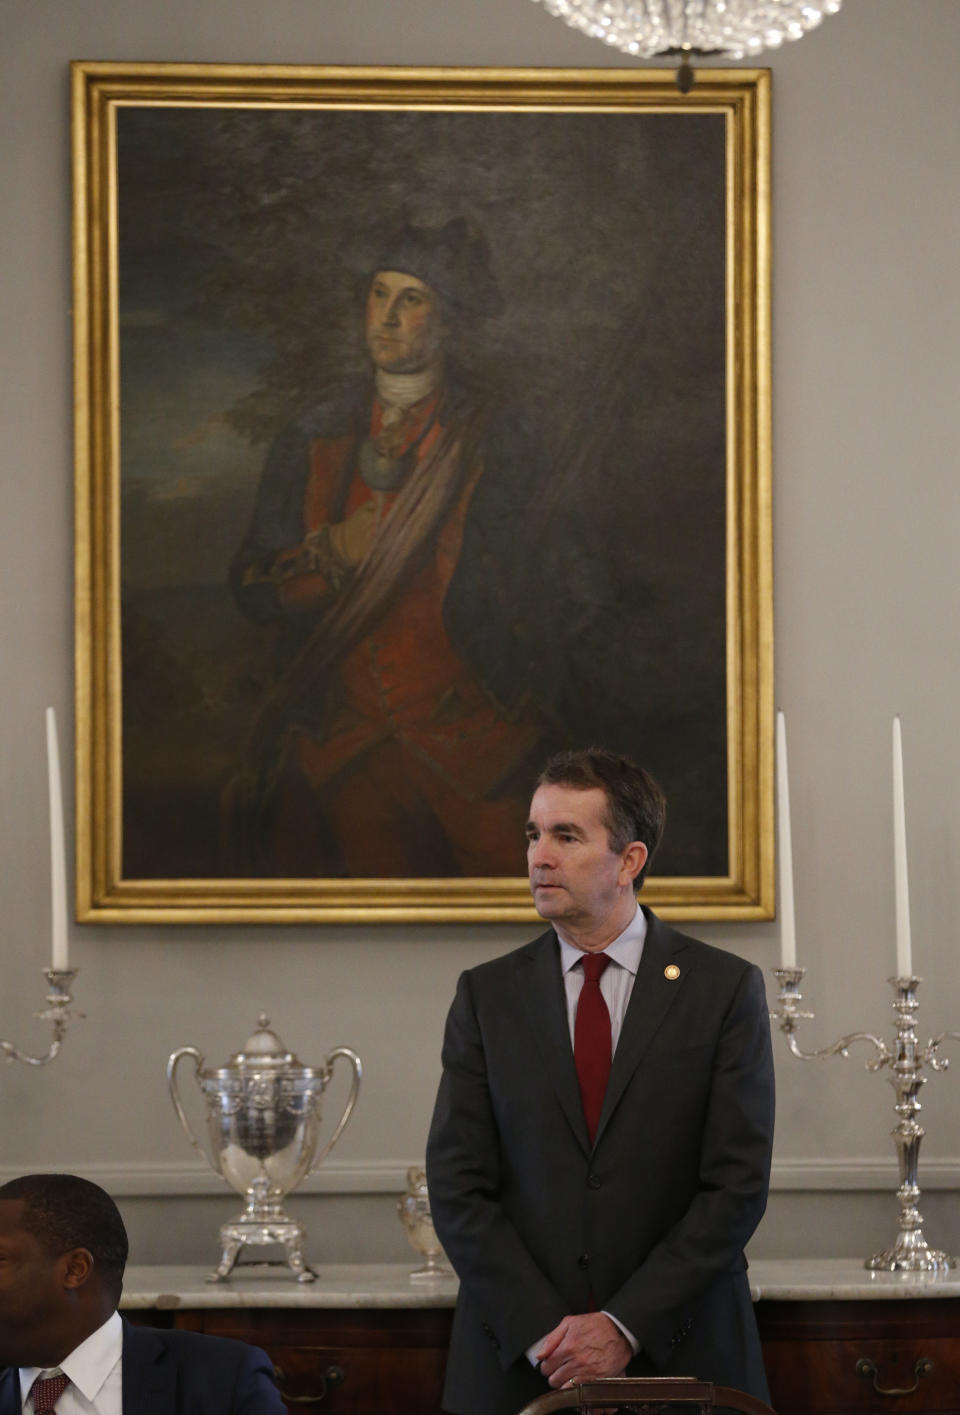 Virginia Gov. Ralph Northam stands under a portrait of George Washington as he greets members of the Richmond 34 for a breakfast at the Governors Mansion at the Capitol in Richmond, Va., Friday, Feb. 22, 2019. The Richmond 34 were a group of African Americans who defied segregation laws in the 1960's (AP Photo/Steve Helber)